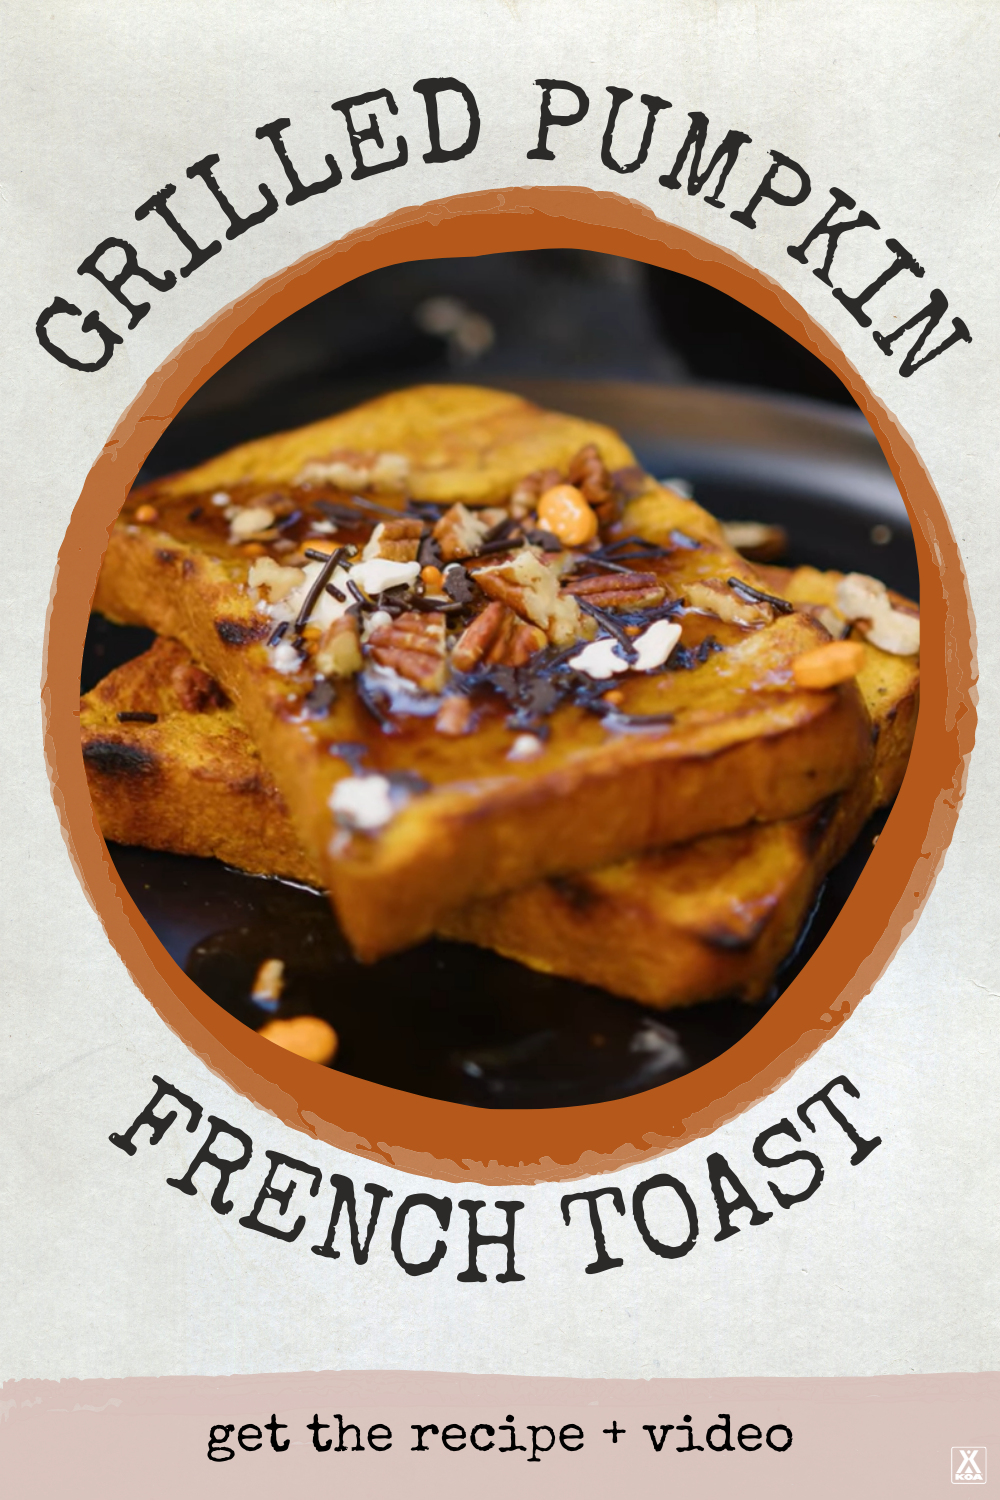 Perfect for chilly mornings at home or at your favorite campground, add your favorite fall flavors to this grilled french toast recipe.